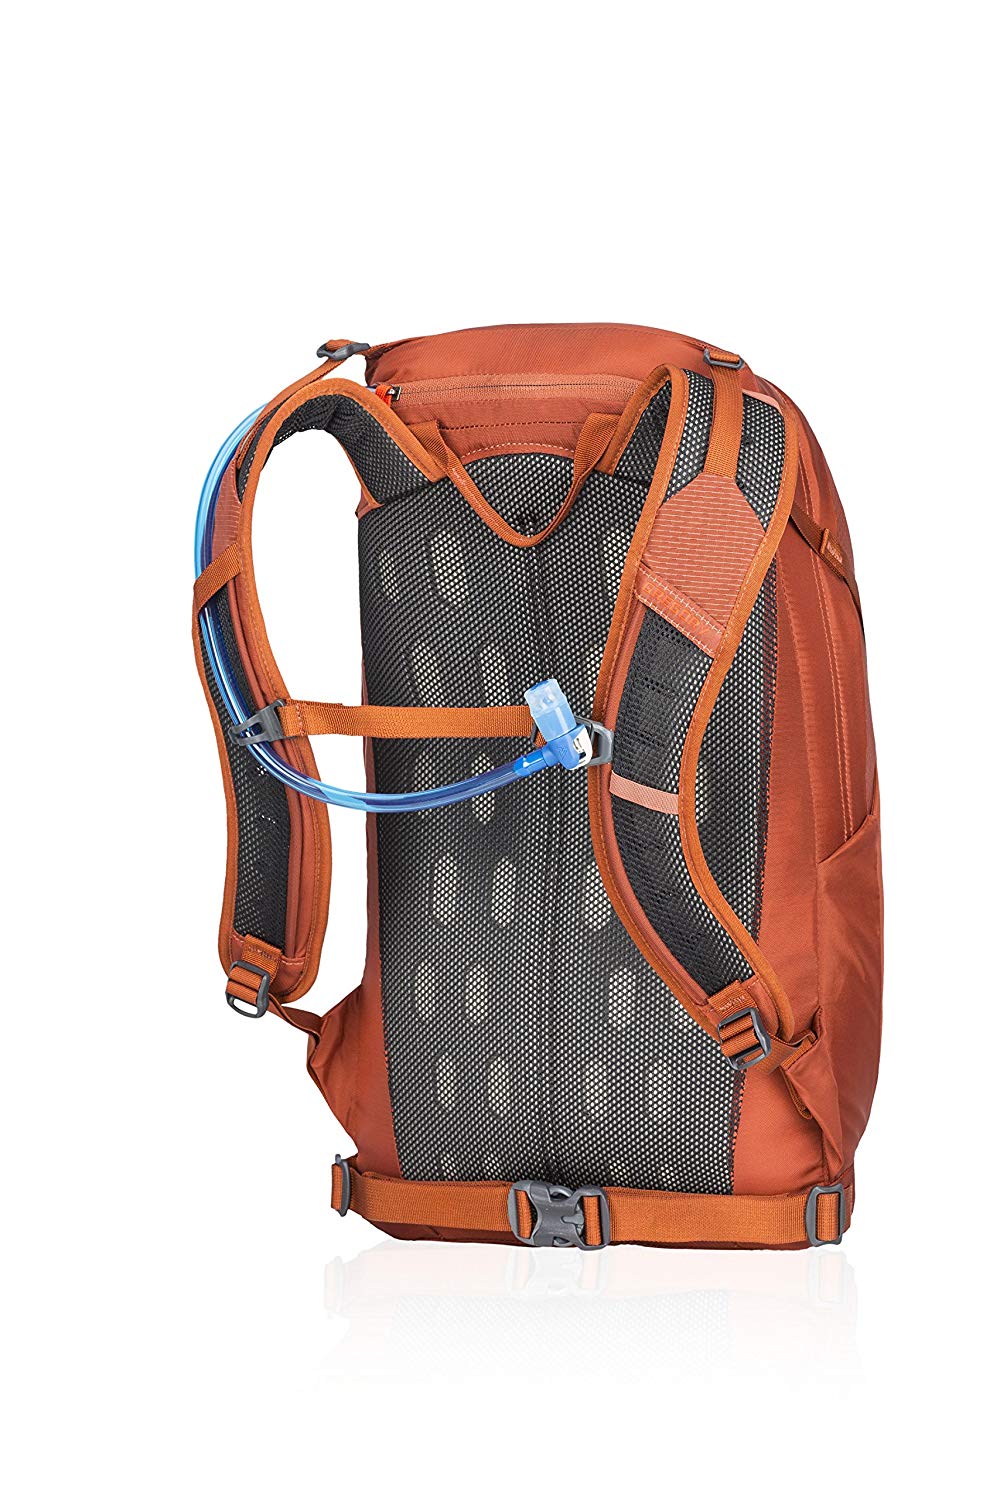 Gregory Inertia 20 3D-Hydro Daypack - Ventilated Backpanel